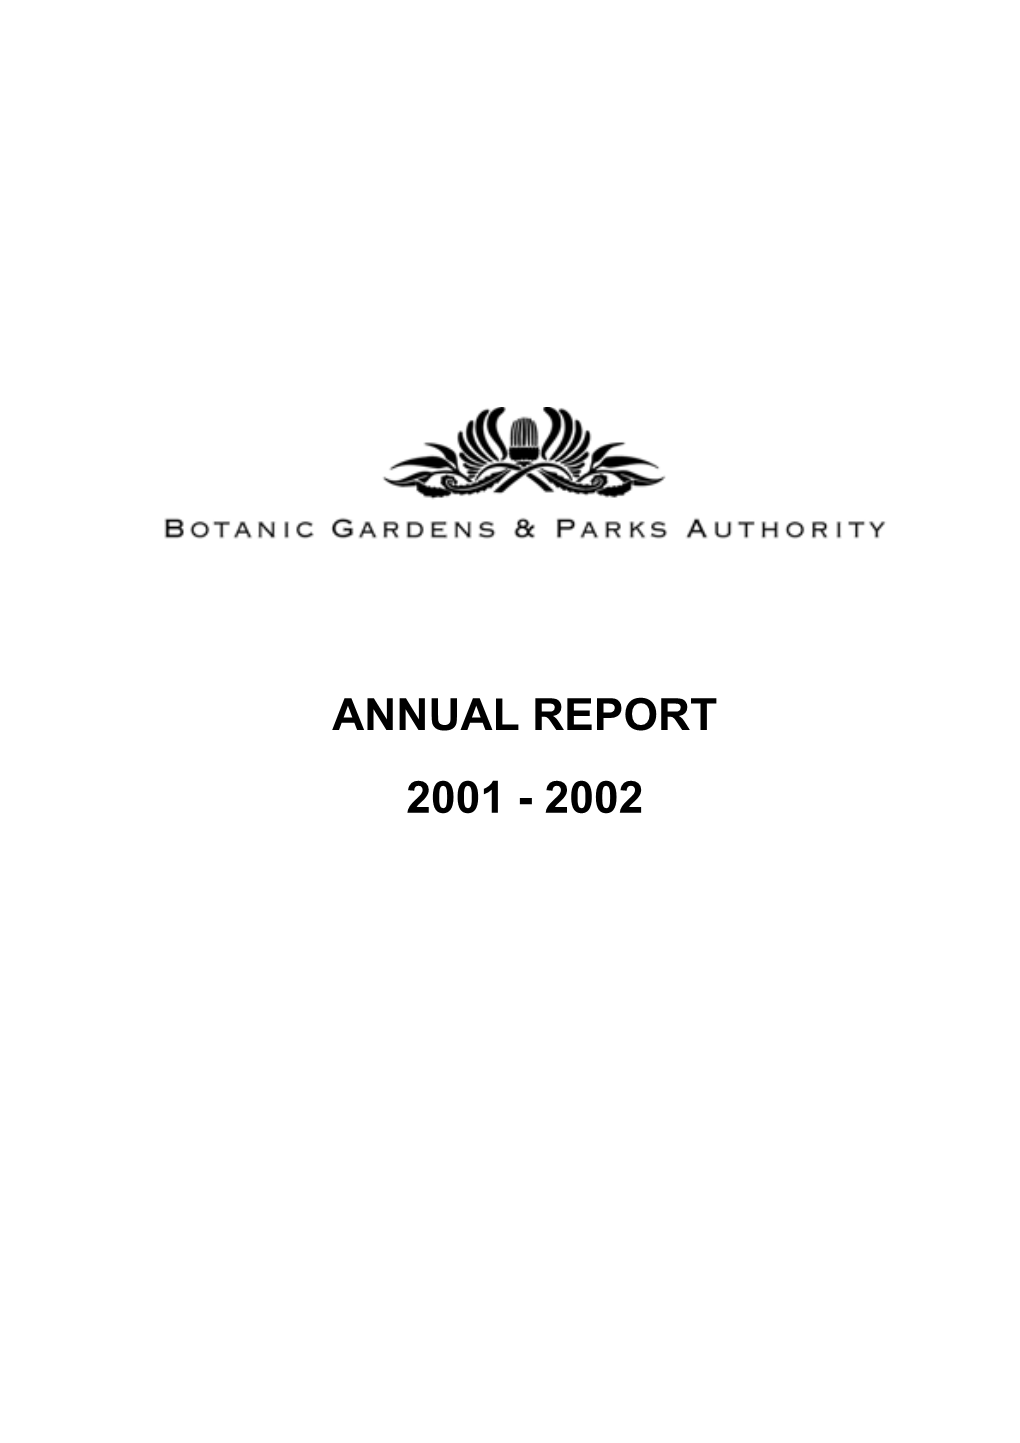 Botanic Gardens and Parks Authority for the Financial Year Ended 30 June 2002